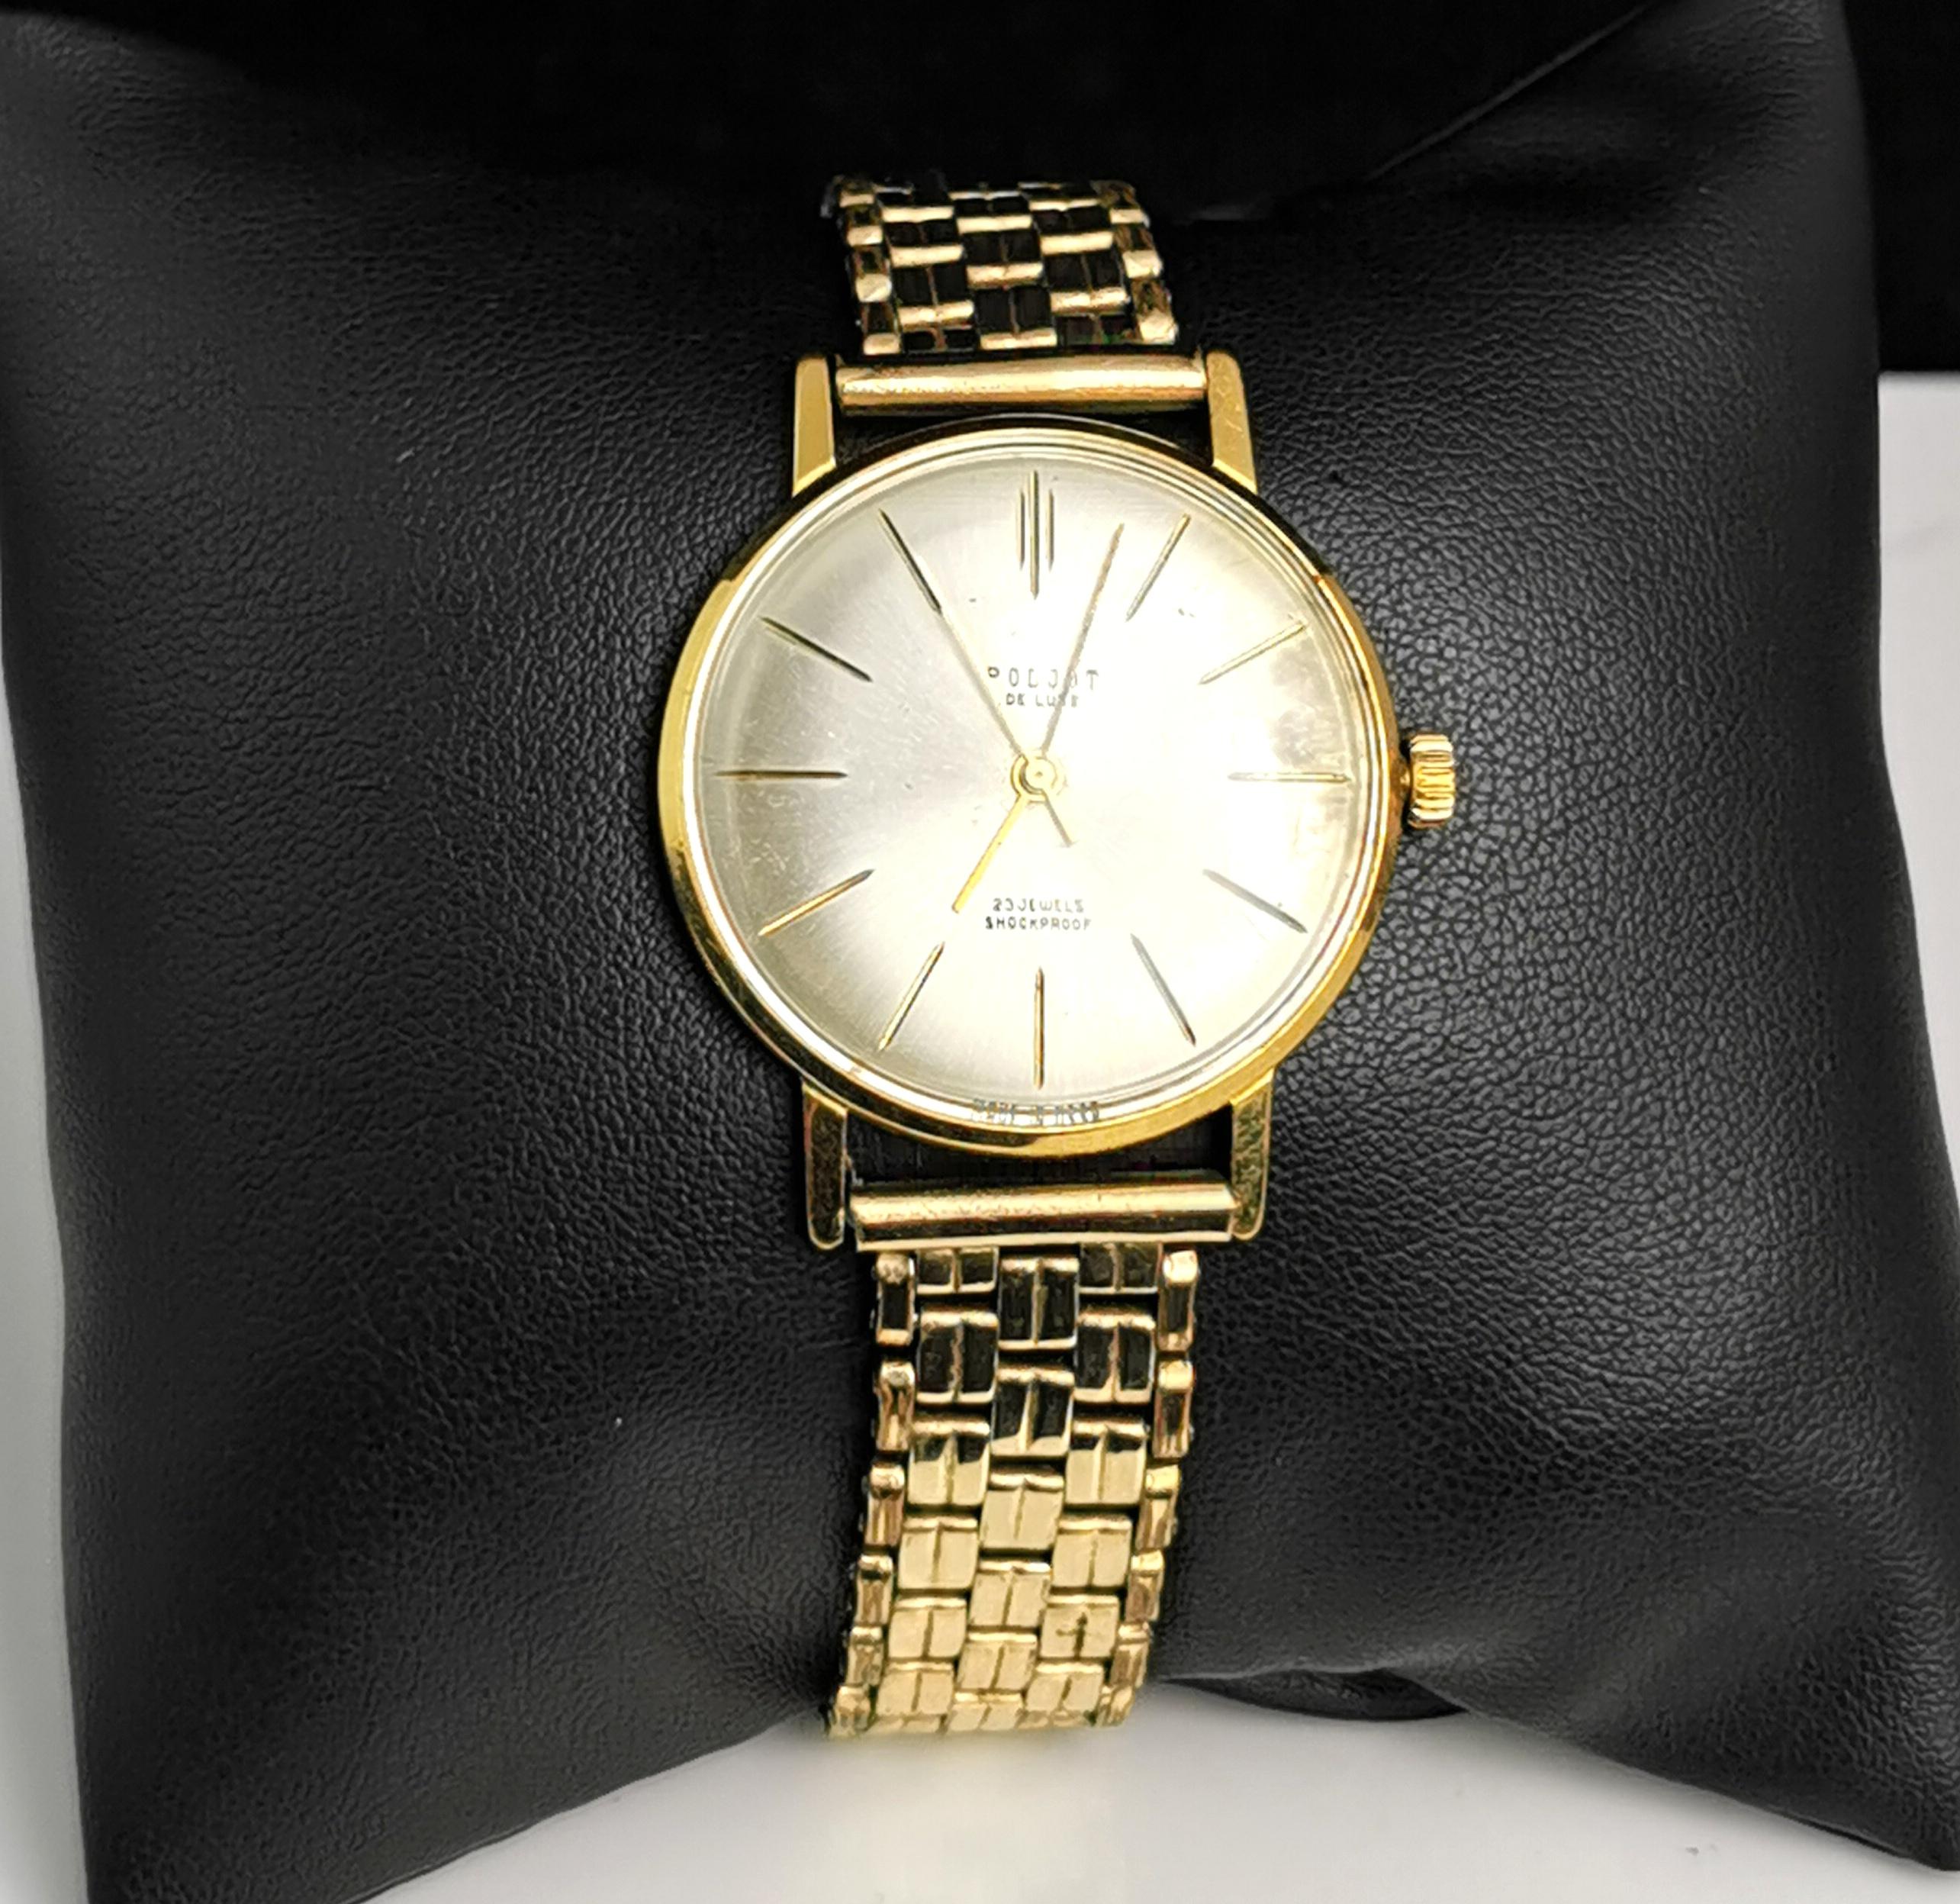 A stylish vintage Russian Poljot De Luxe gold plated watch.

This is a bracelet strap watch with an elegant circular shaped face and a champagne coloured dial and gold tone hands.

Marked on the face 23 jewels, Shockproof.

It is rolled gold and